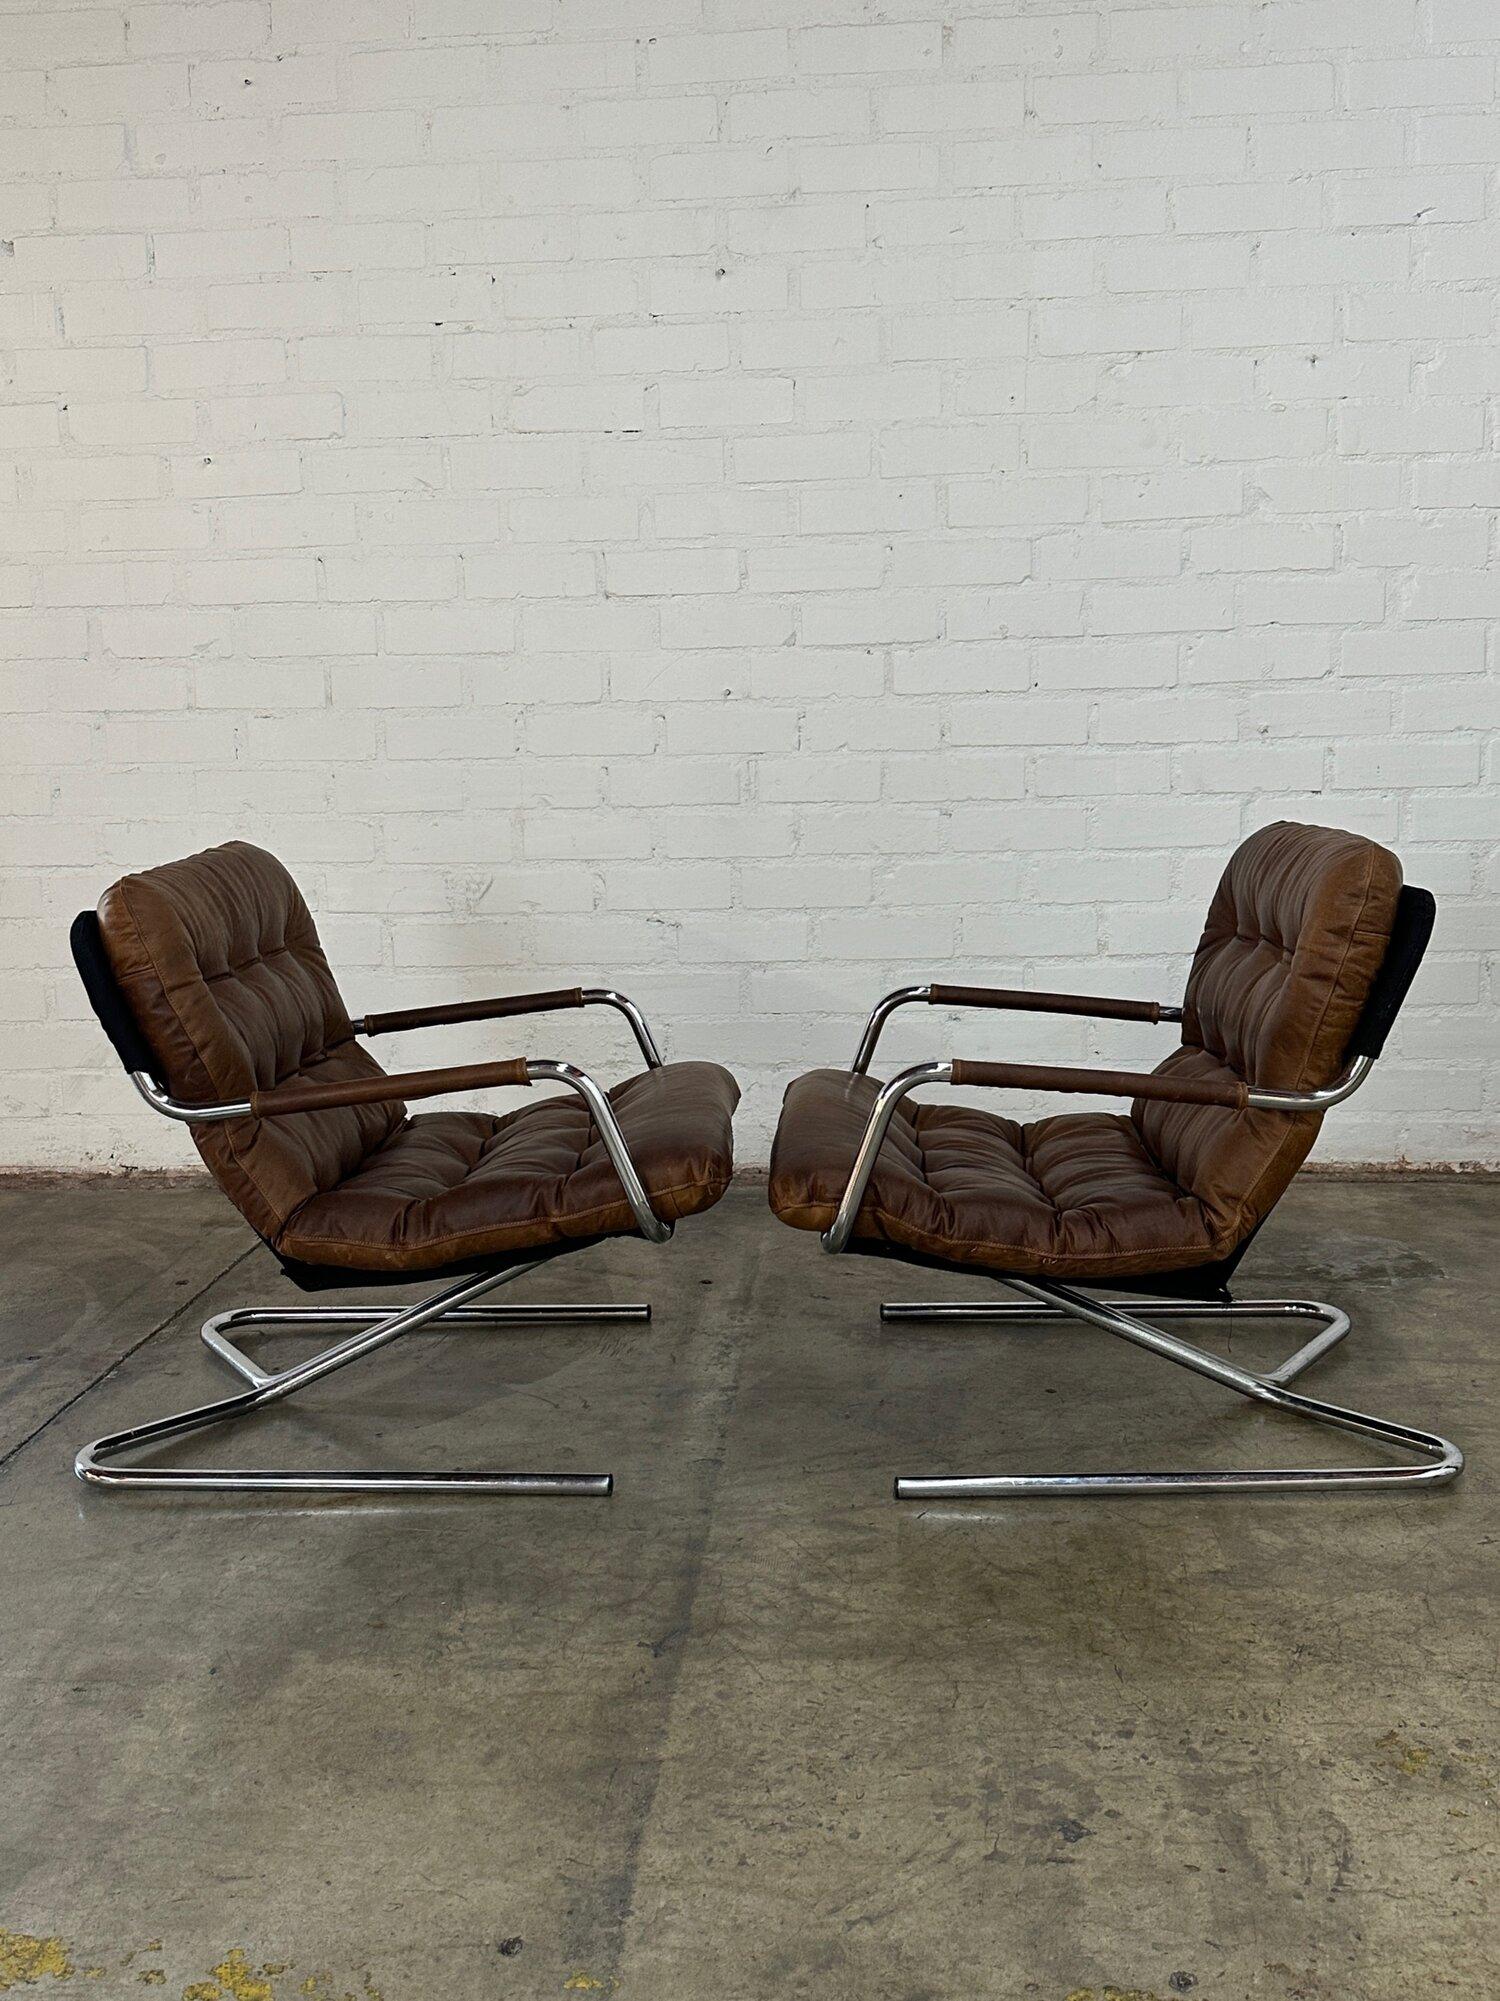 Cantilevered Italian Lounge chairs - sold separately 2